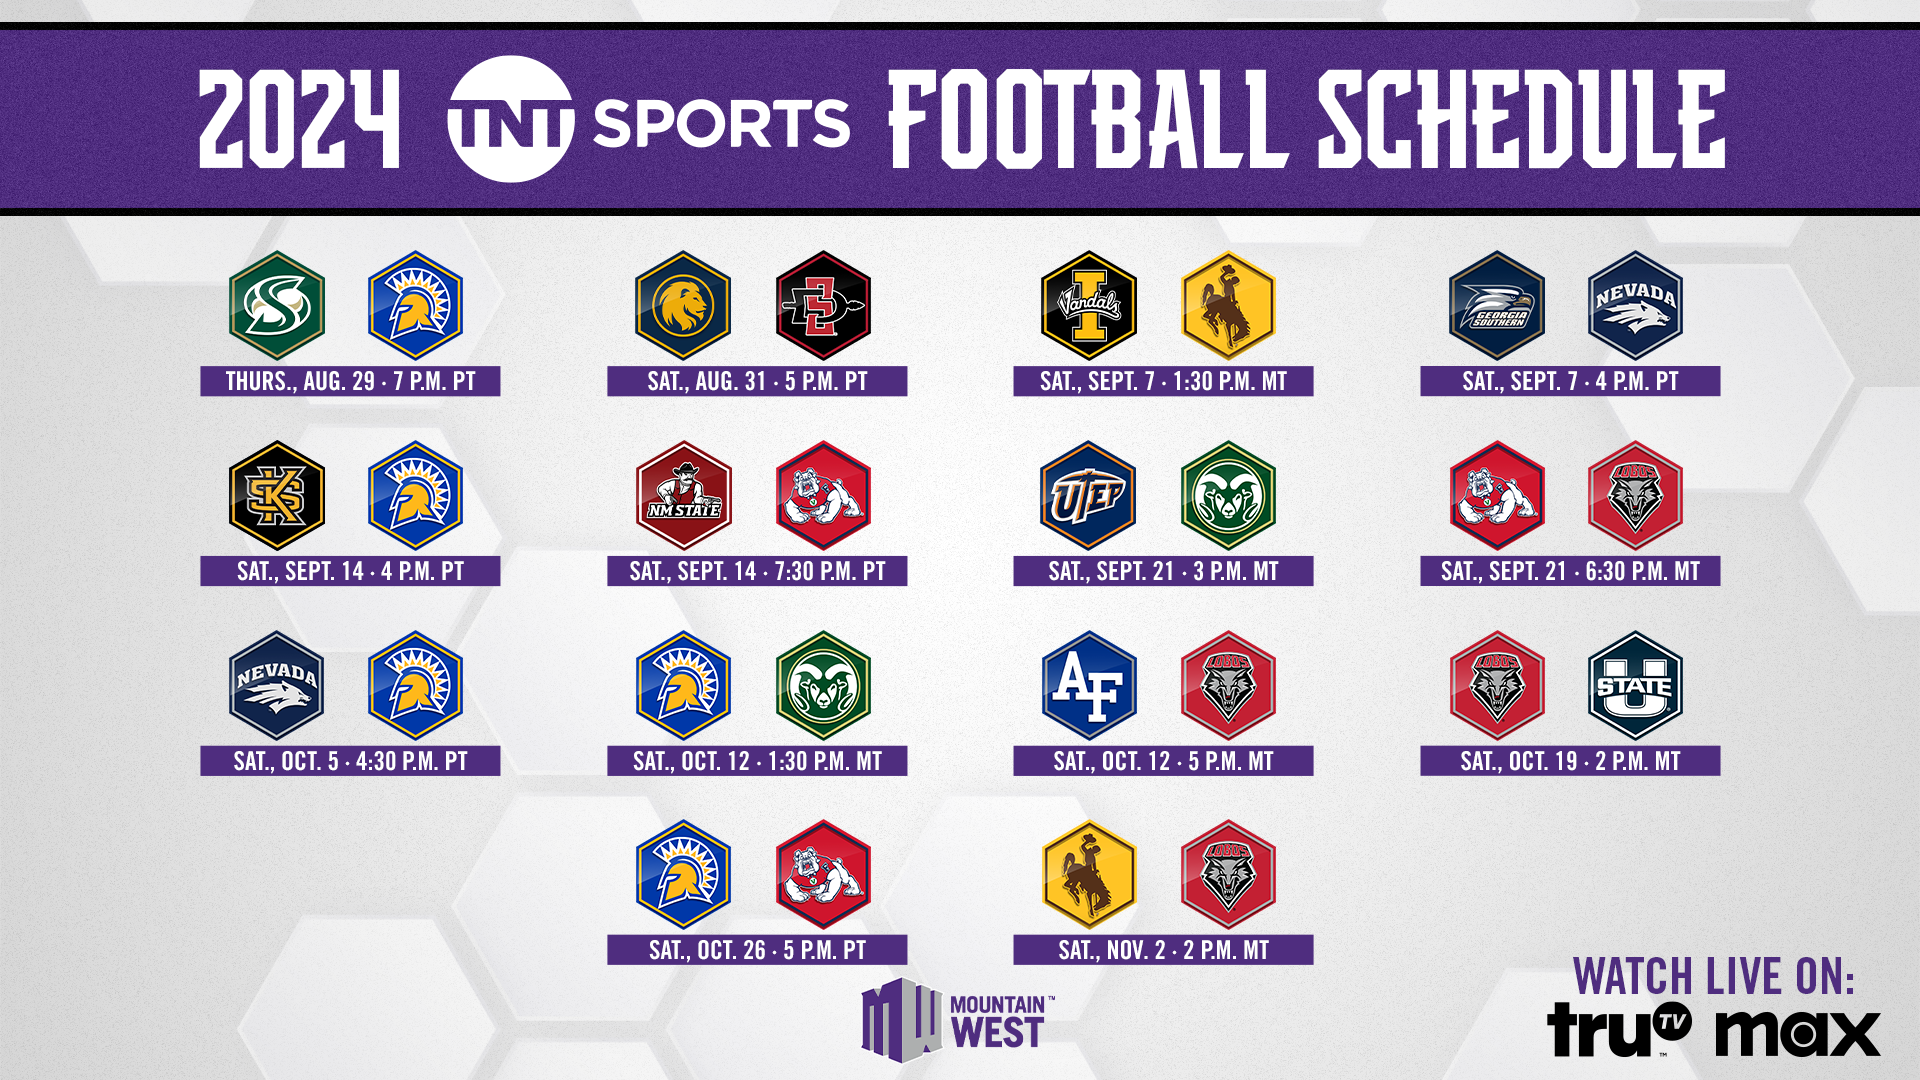 TNT Sports and Mountain West Reach Multi-Year College Football Agreement Beginning This Season